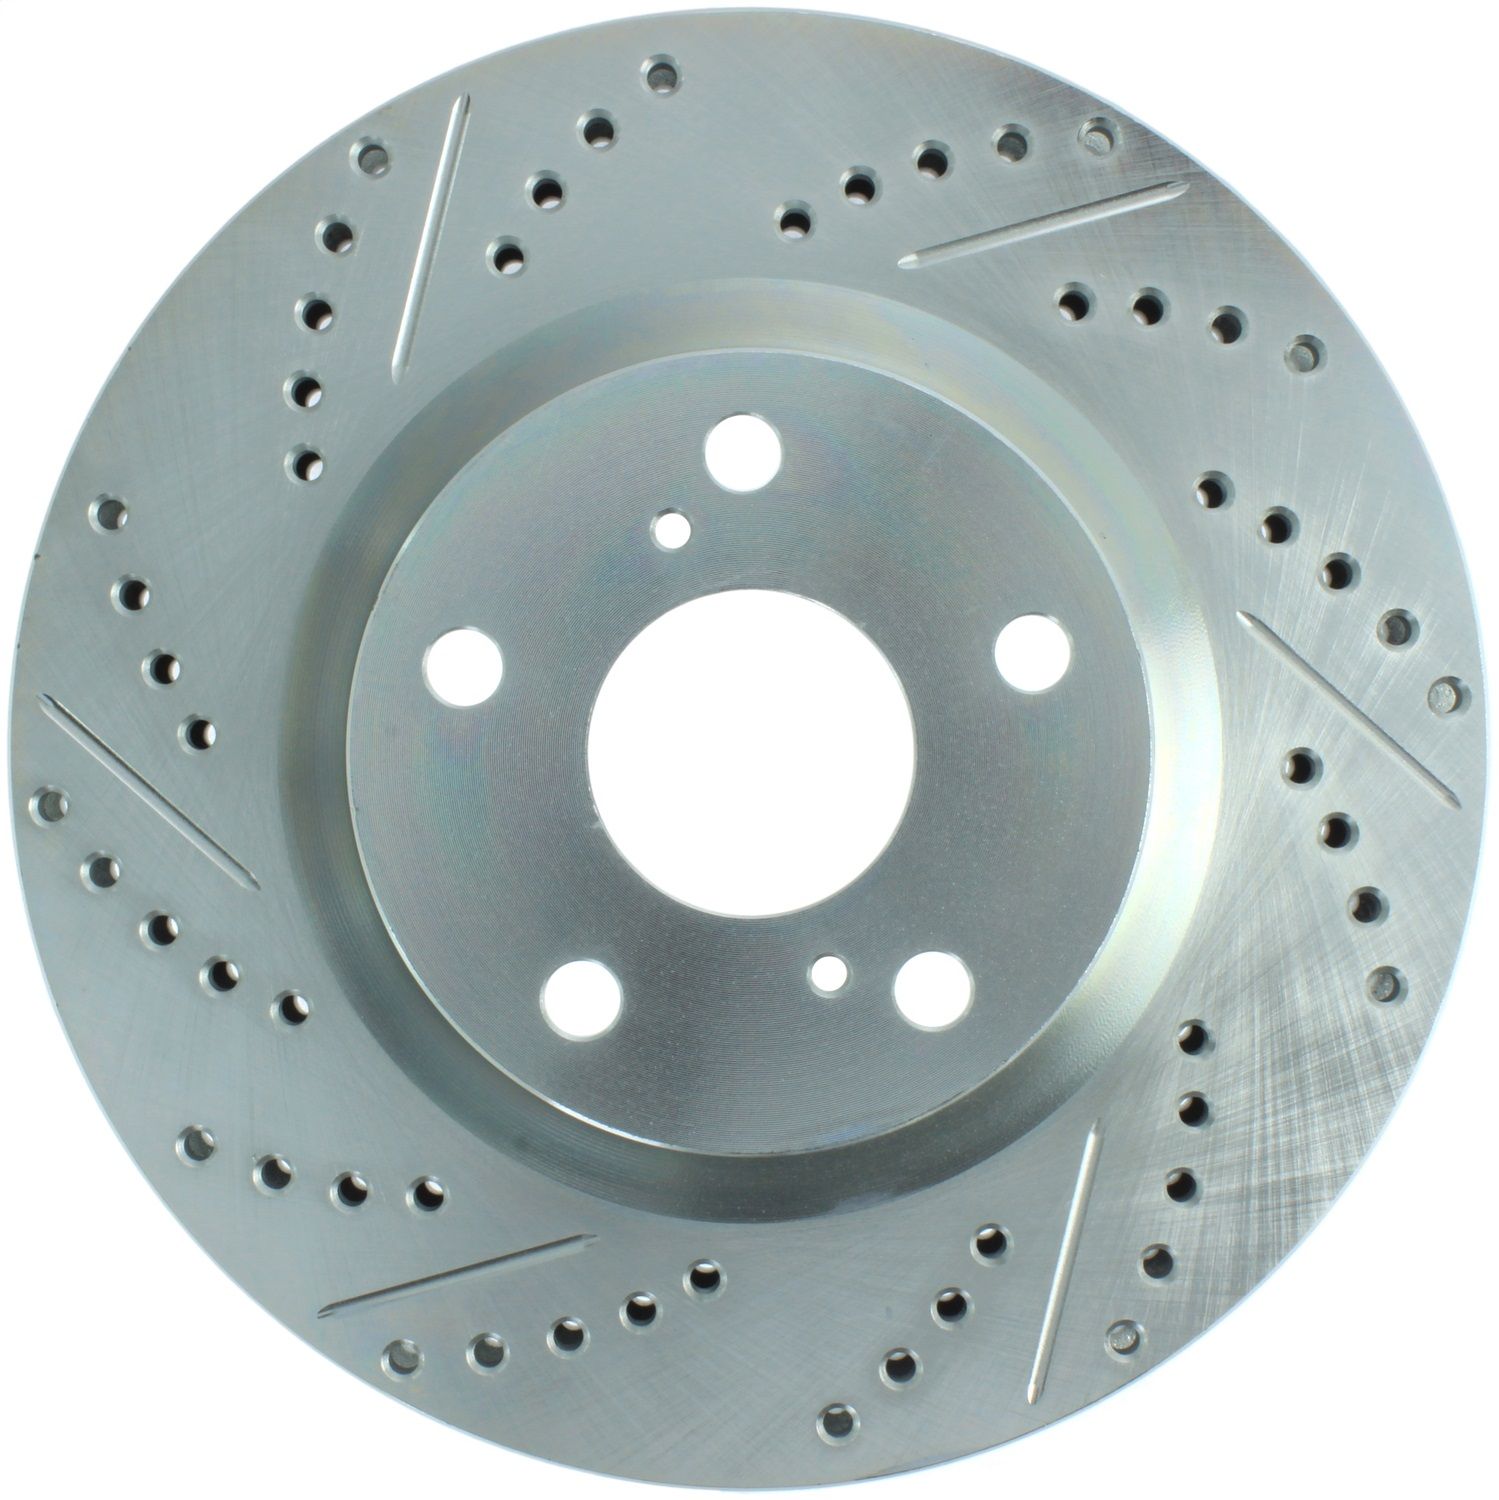 2009 2010 2011 2012 for Toyota RAV4 Front & Rear Brake Rotors and Pads